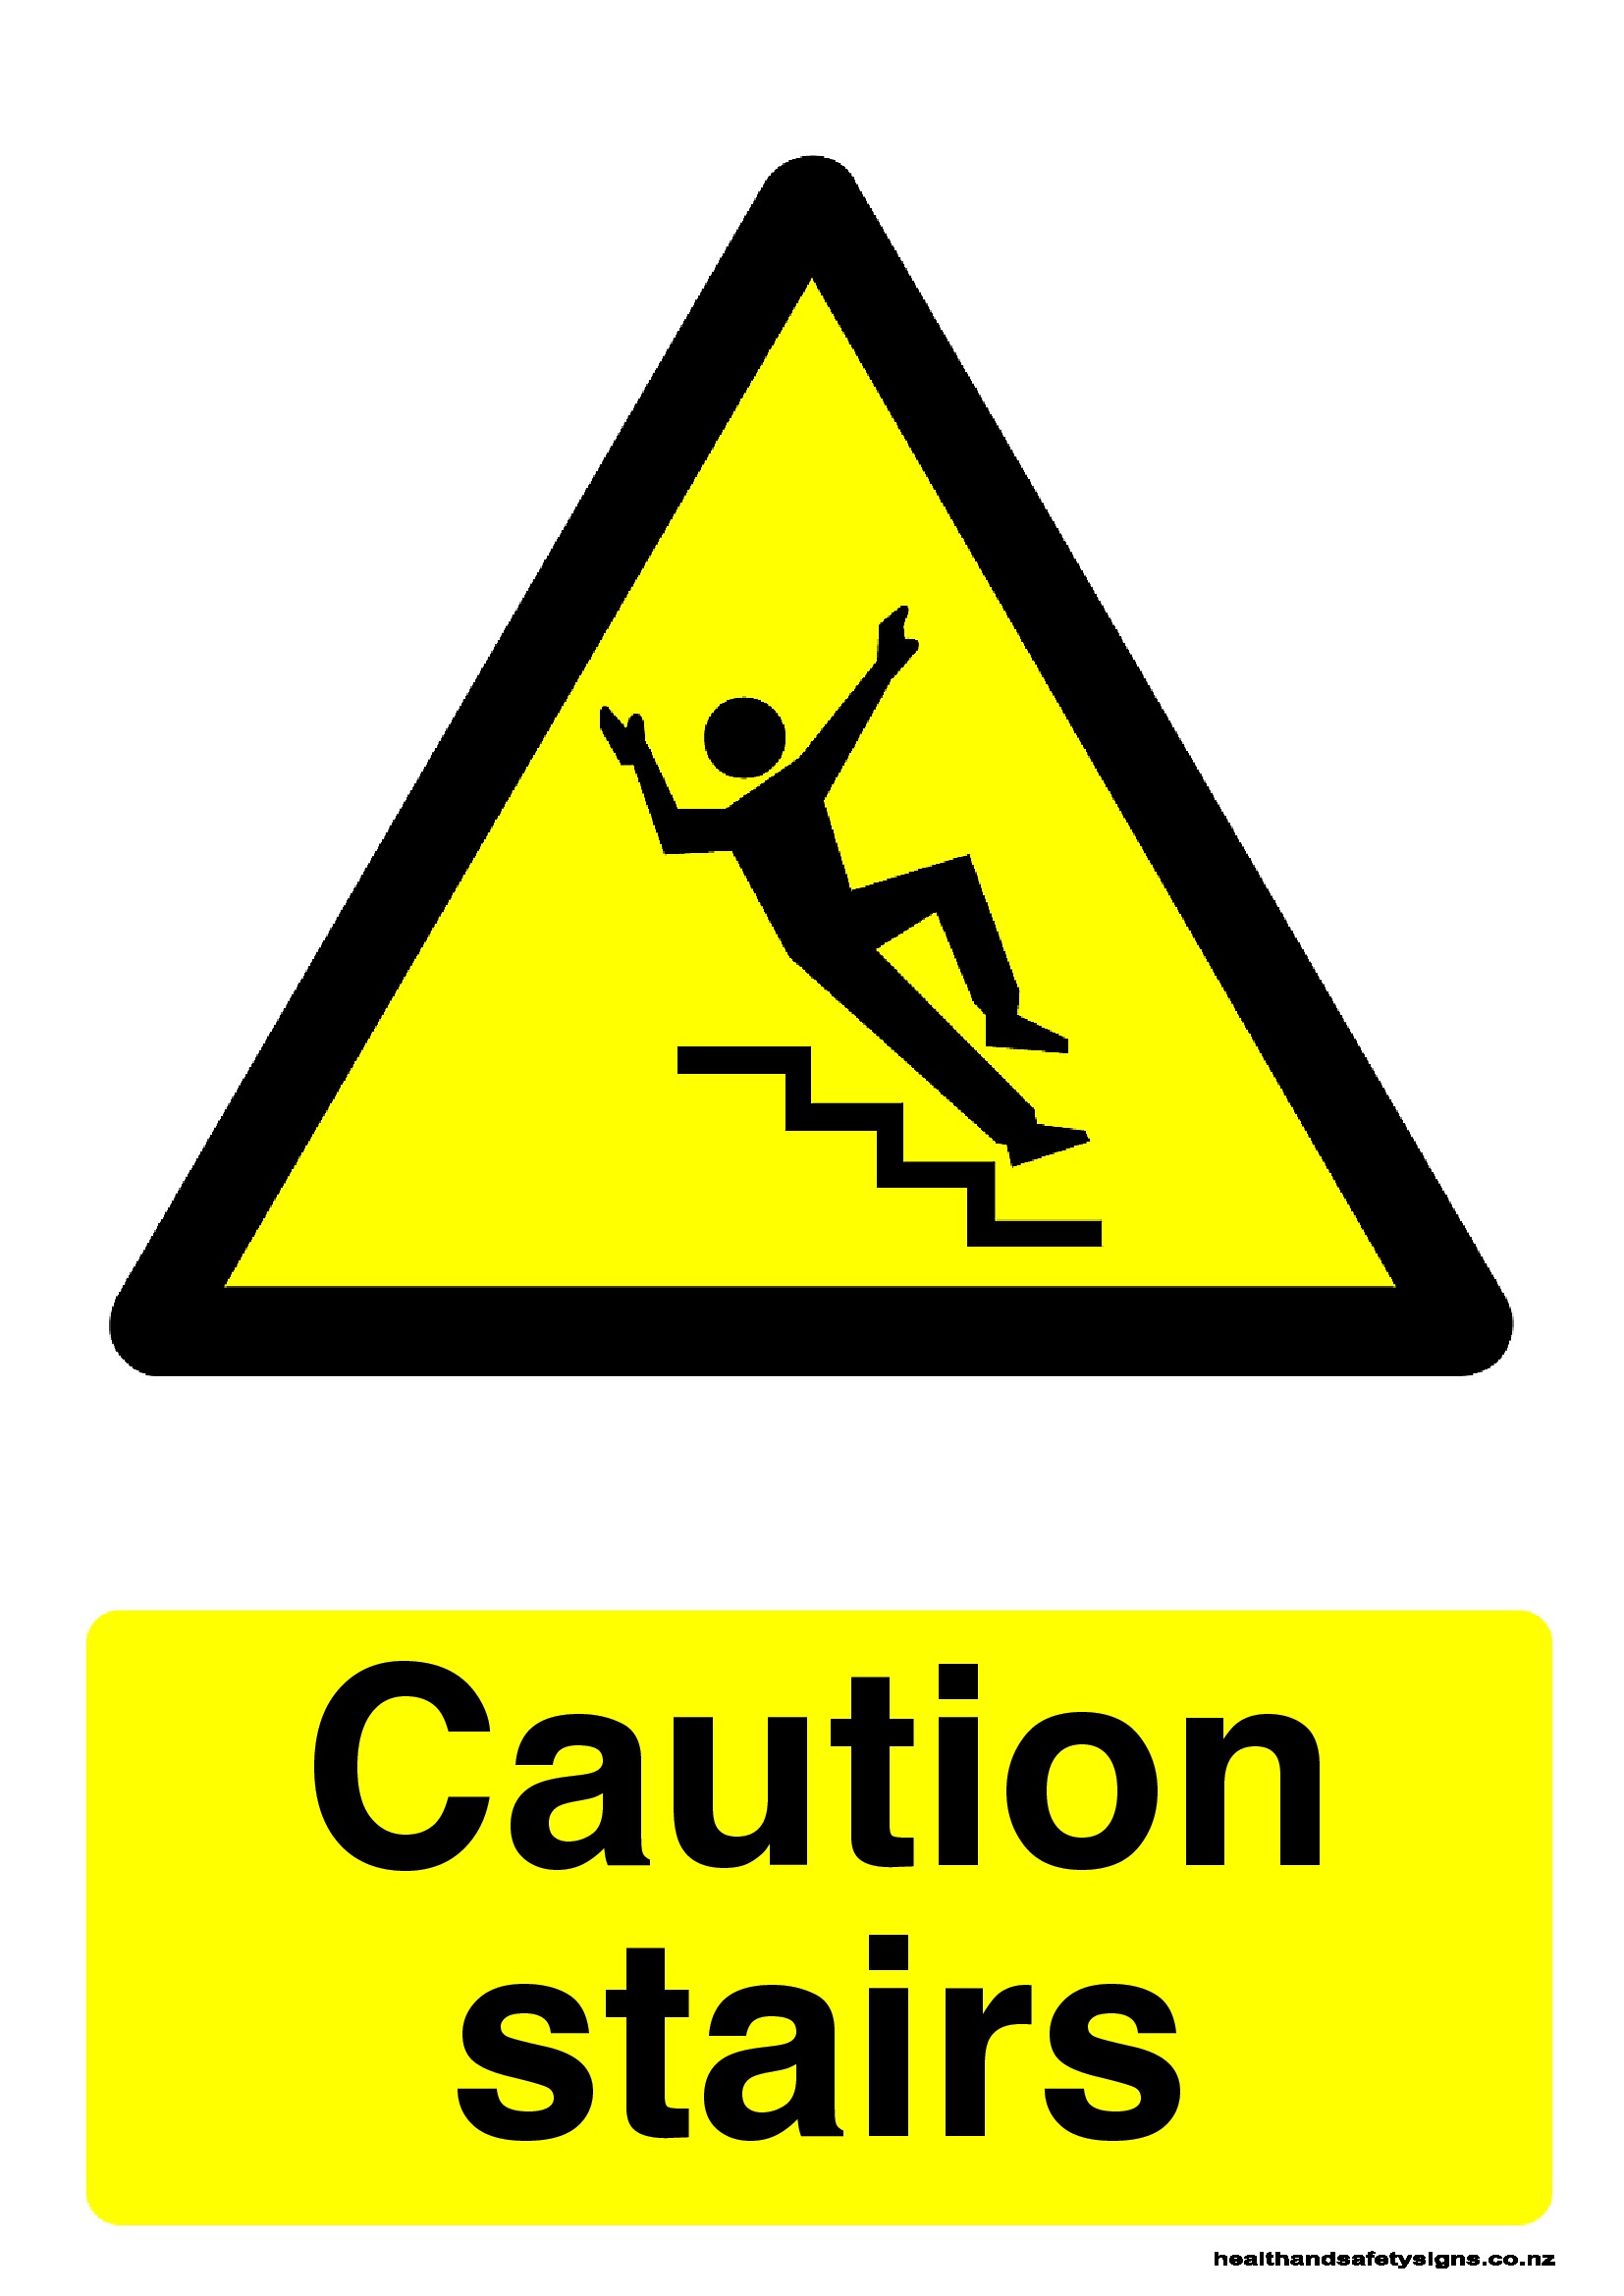 Caution stairs warning sign Health and Safety Signs